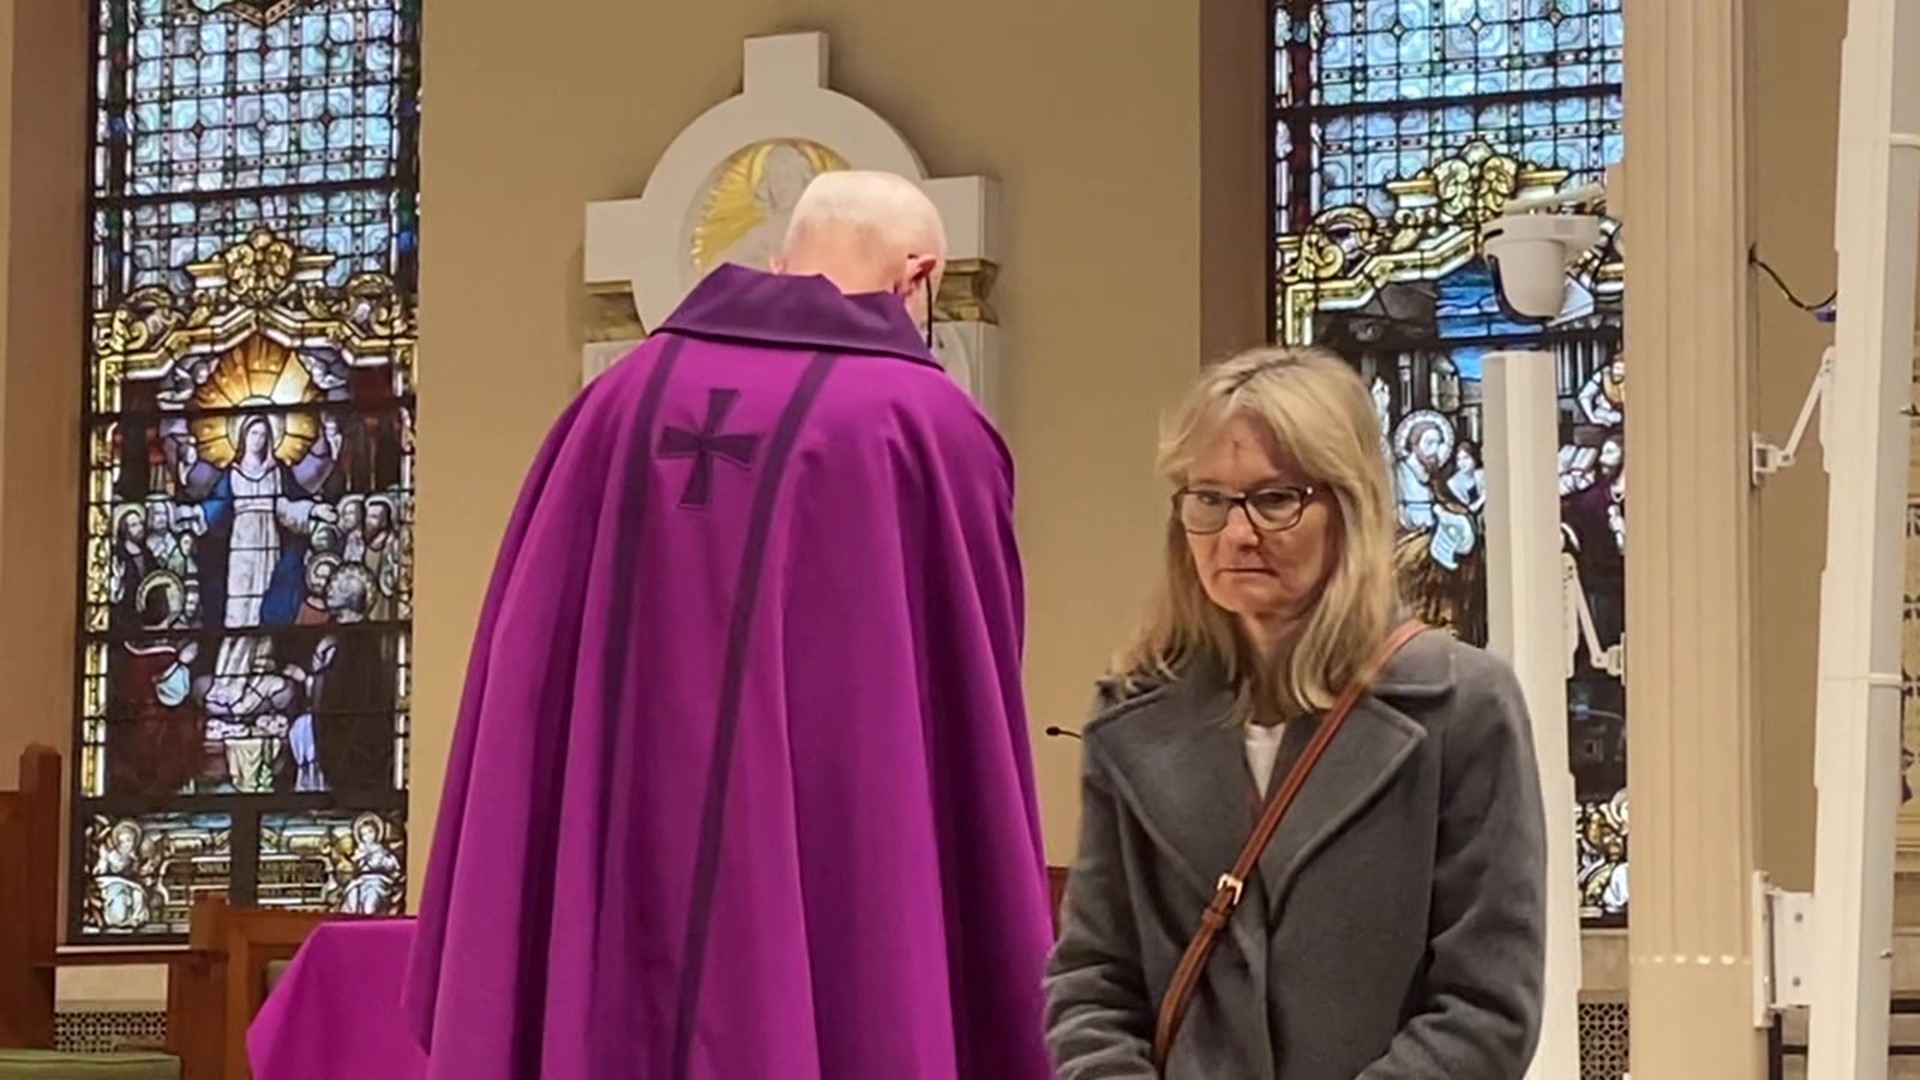 For the second year in a row, some COVID protocols are still in place for Ash Wednesday. But parishioners are happy to find comfort in the church.